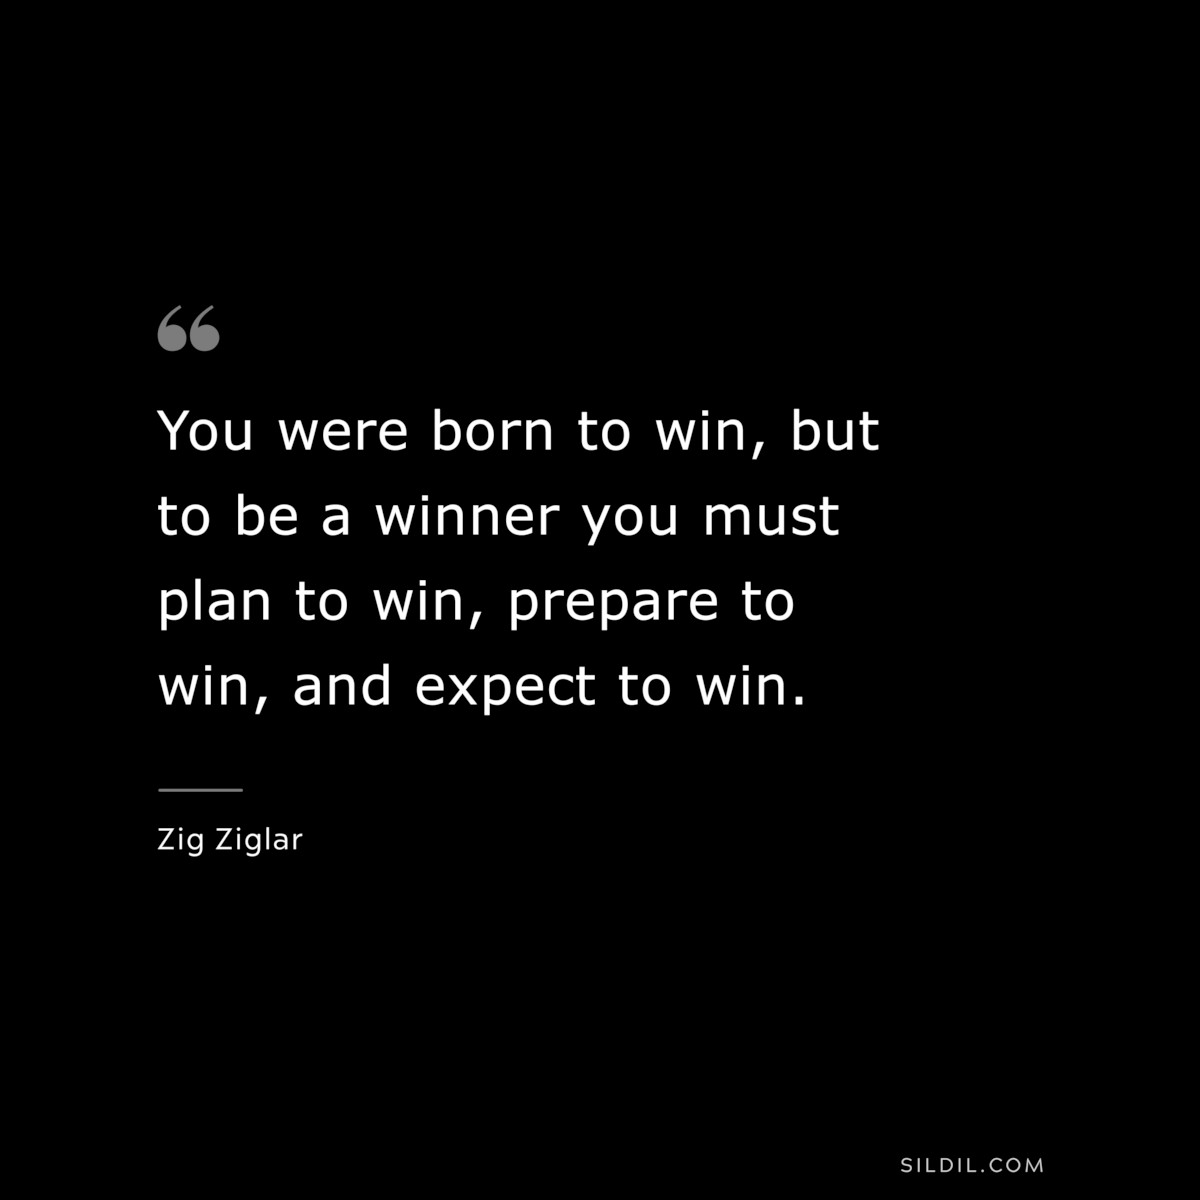 You were born to win, but to be a winner you must plan to win, prepare to win, and expect to win. ― Zig Ziglar